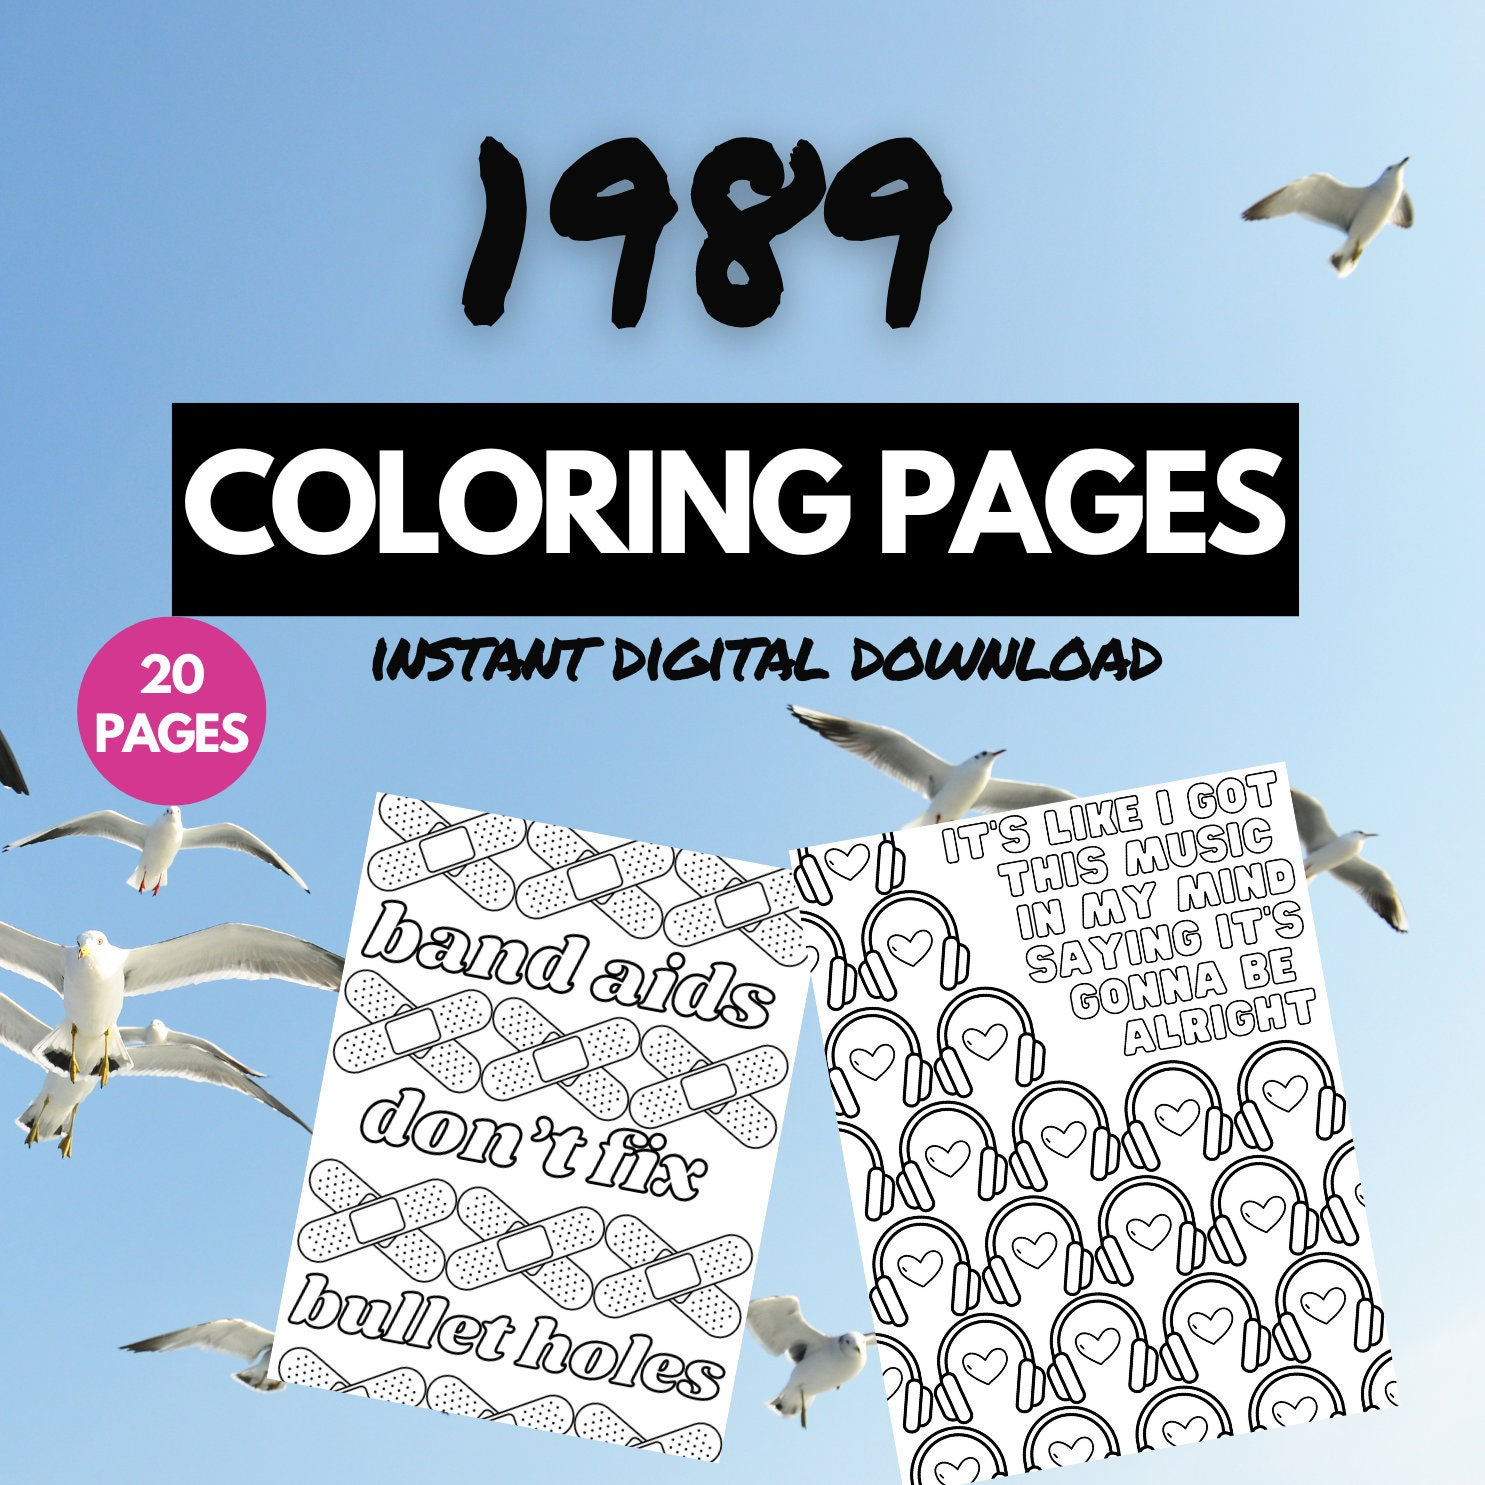 Taylor Swift Colouring & Activity Book - The 100% Unofficial Must